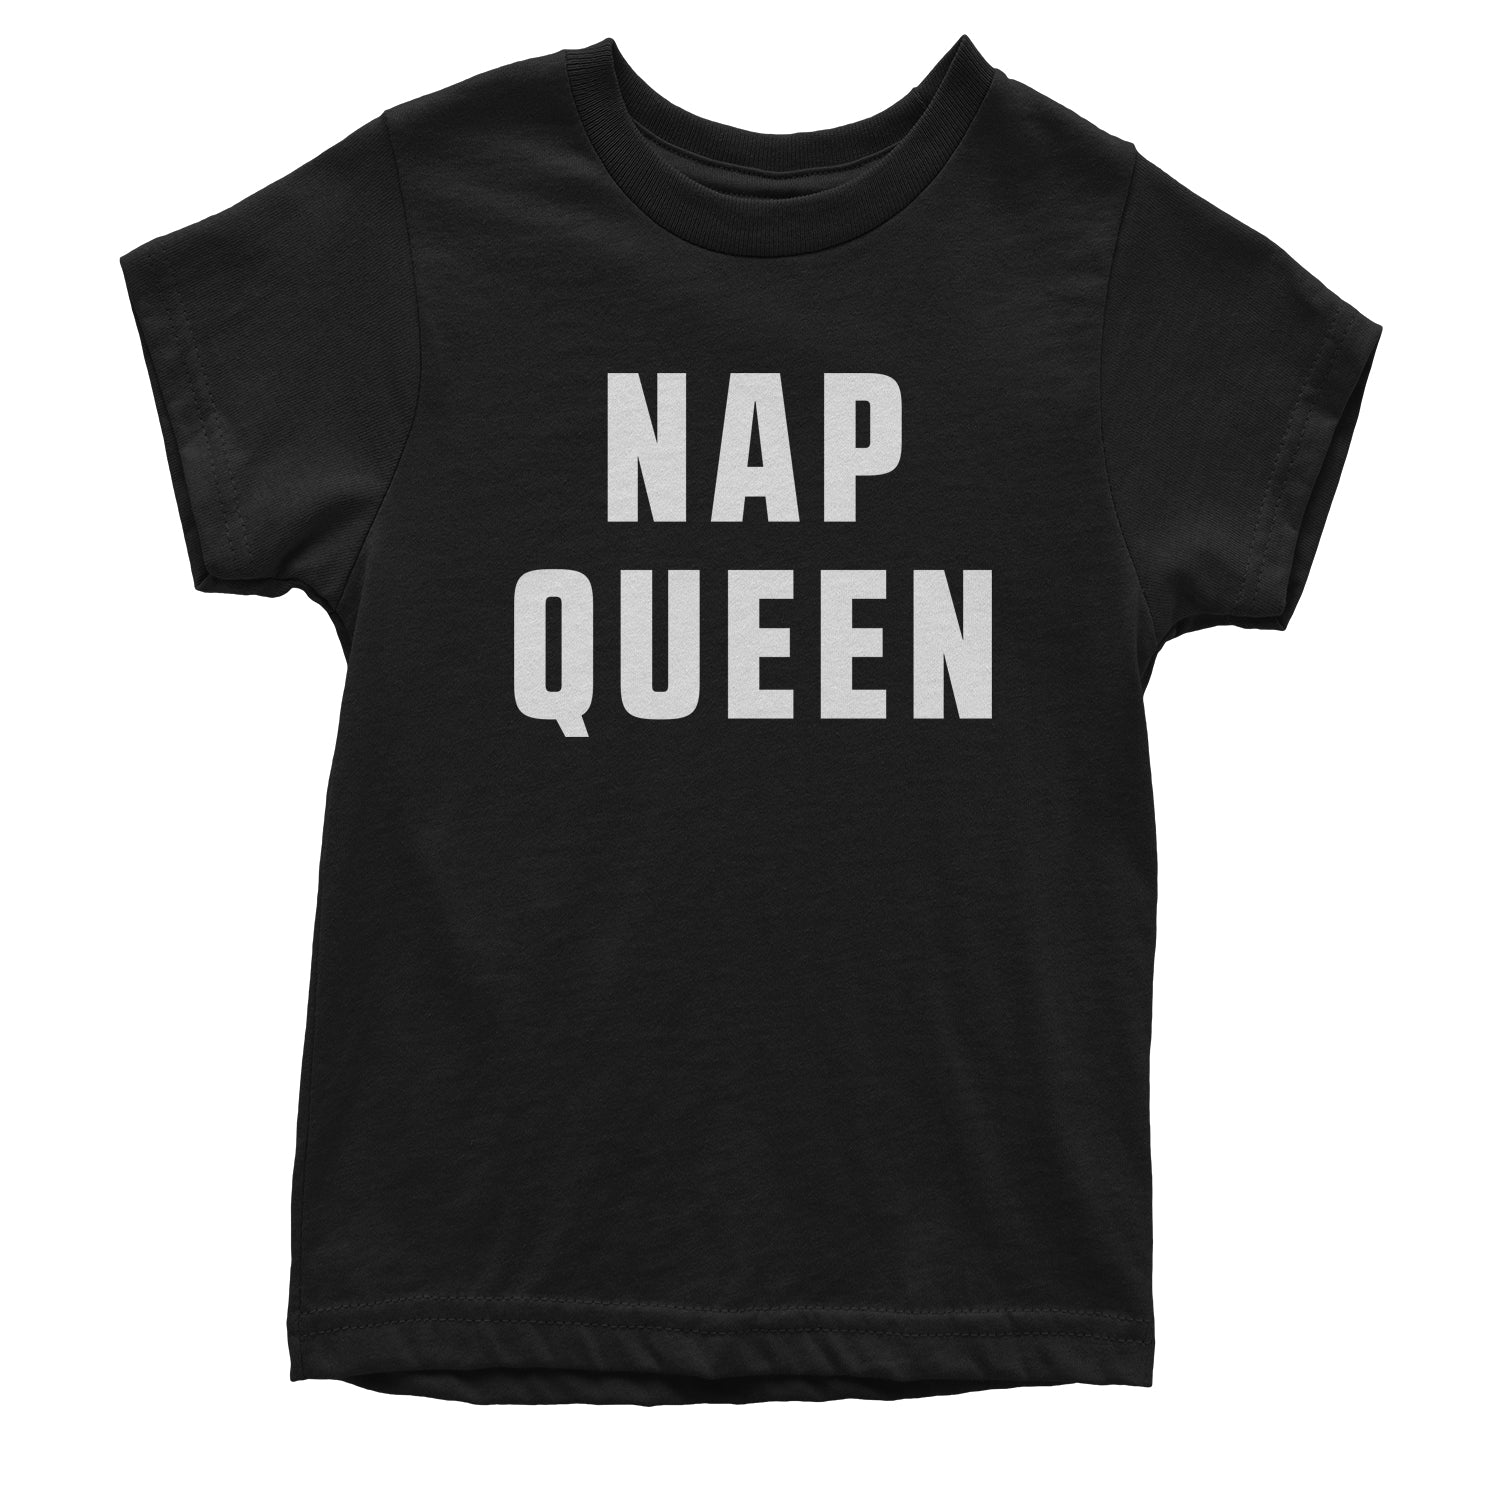 Nap Queen (White Print) Comfy Top For Lazy Days Youth T-shirt all, day, function, lazy, nap, pajamas, queen, siesta, sleep, tired, to, too by Expression Tees